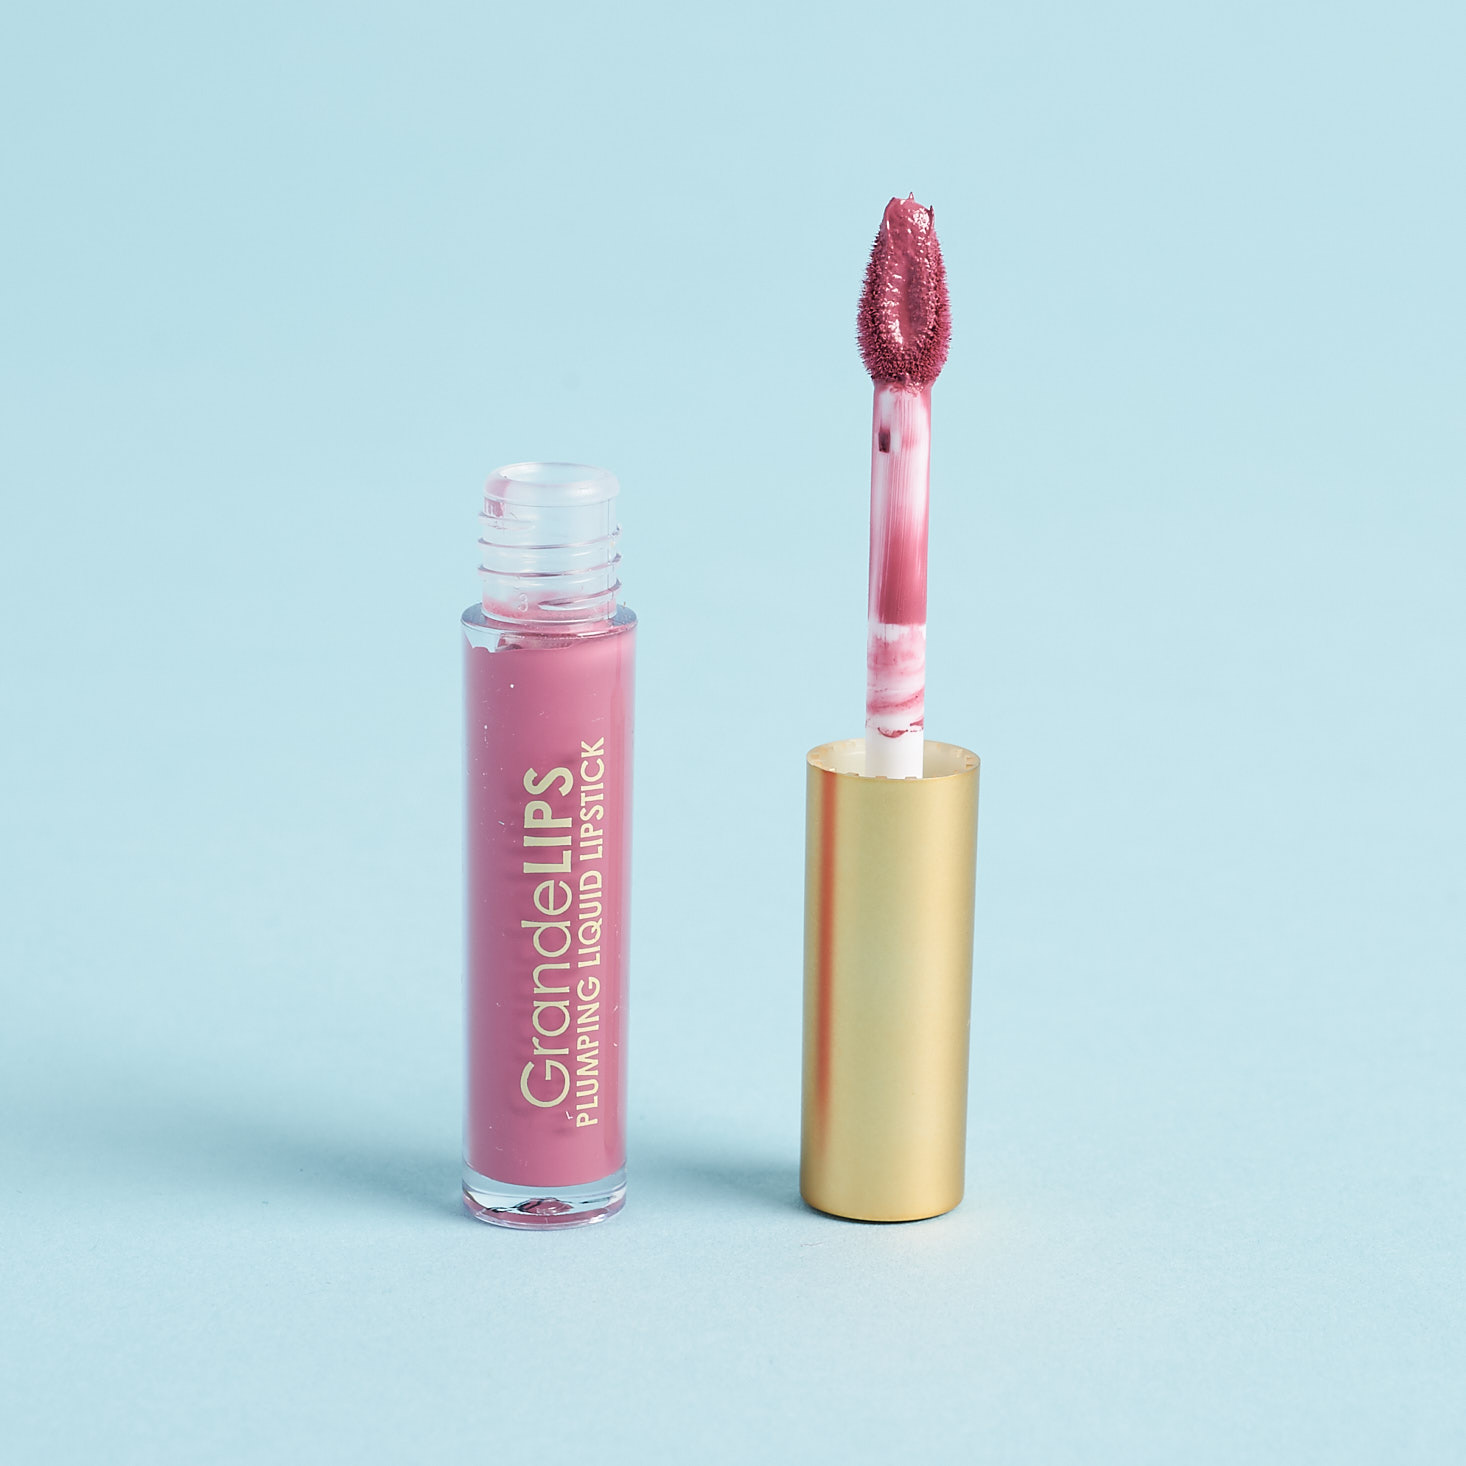 Birchbox Curated #2 May 2019 beauty box review grande lips open